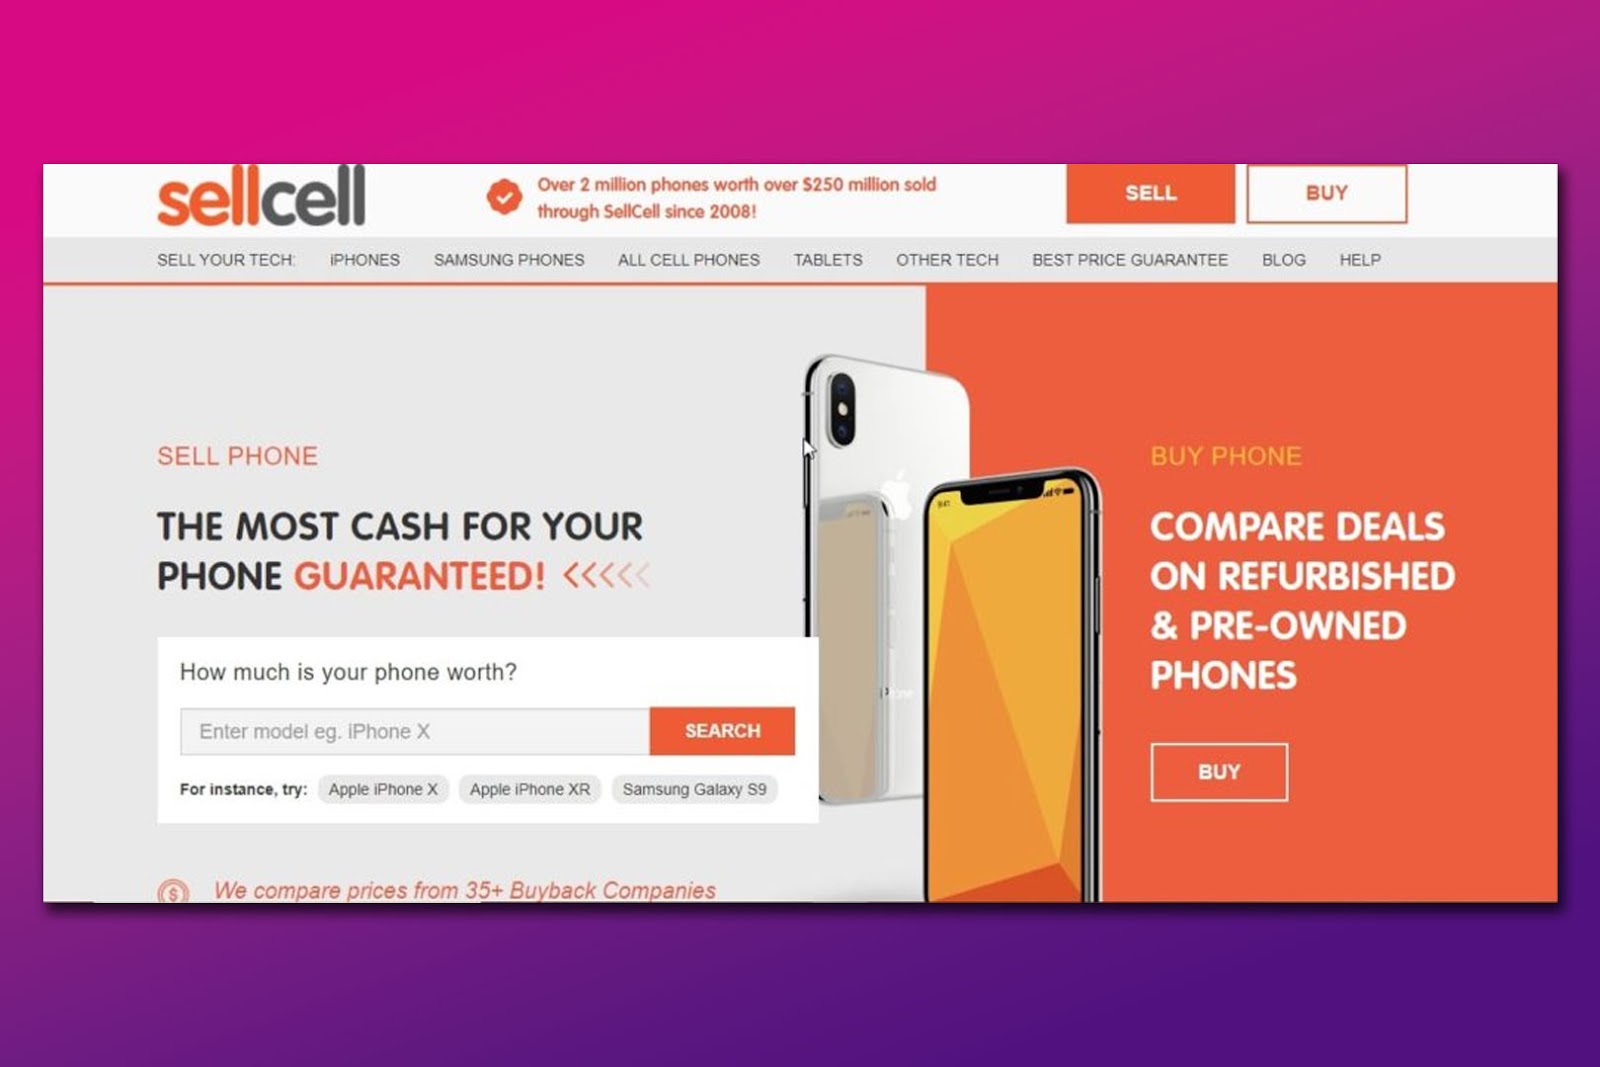 How to Assess Your Broken iPhone on SellCell